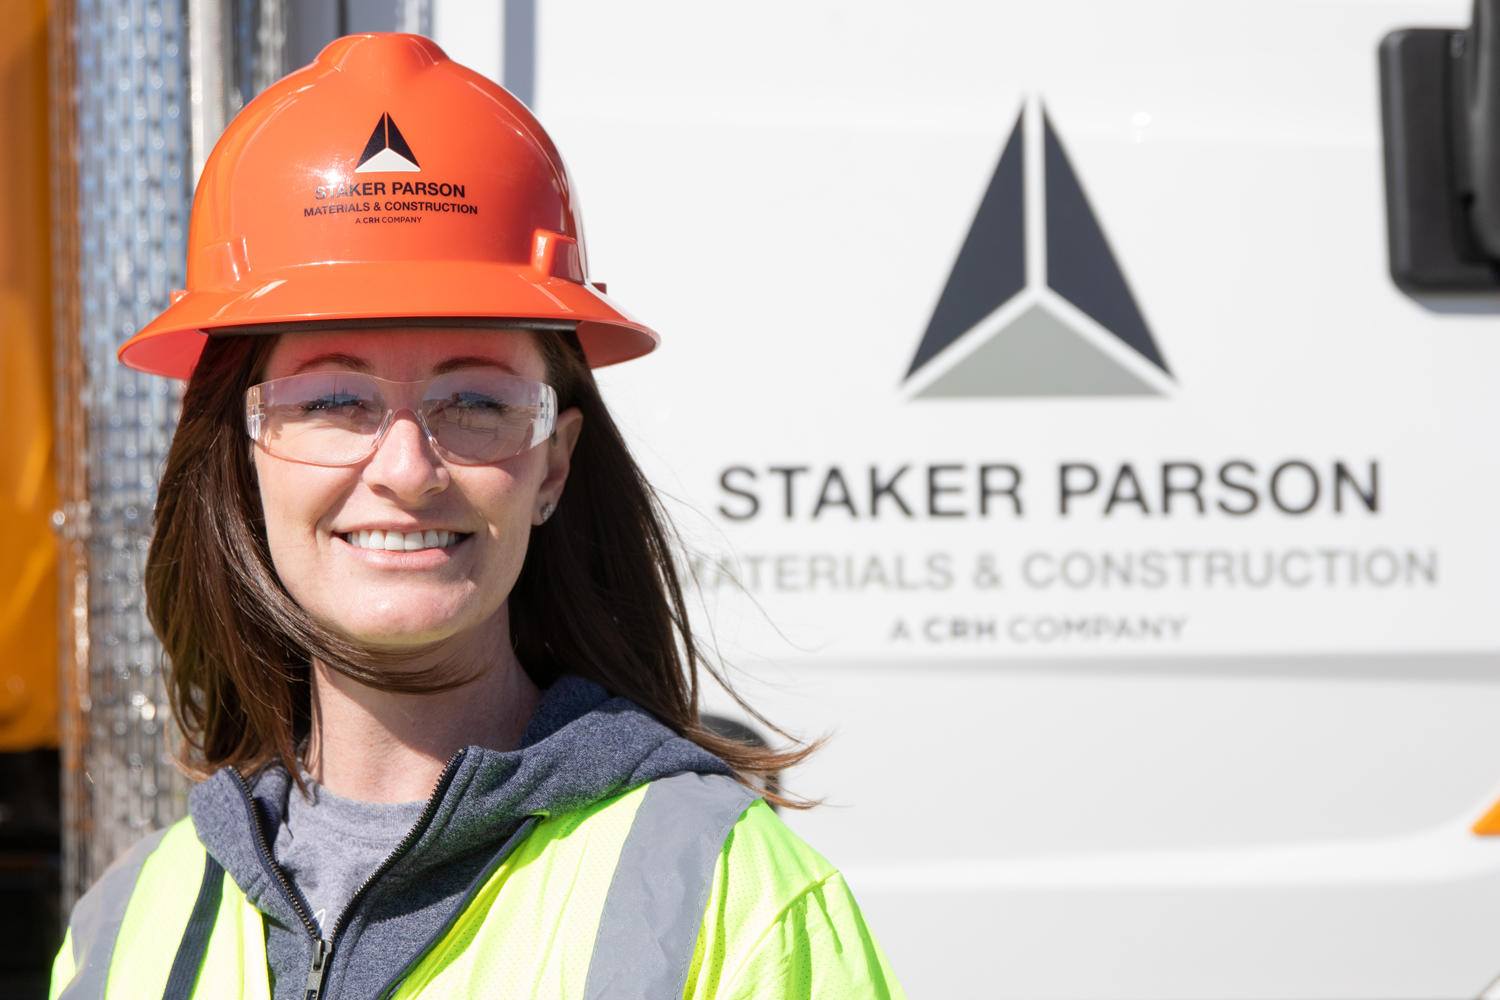 Image 3 | Staker Parson Materials & Construction, A CRH Company